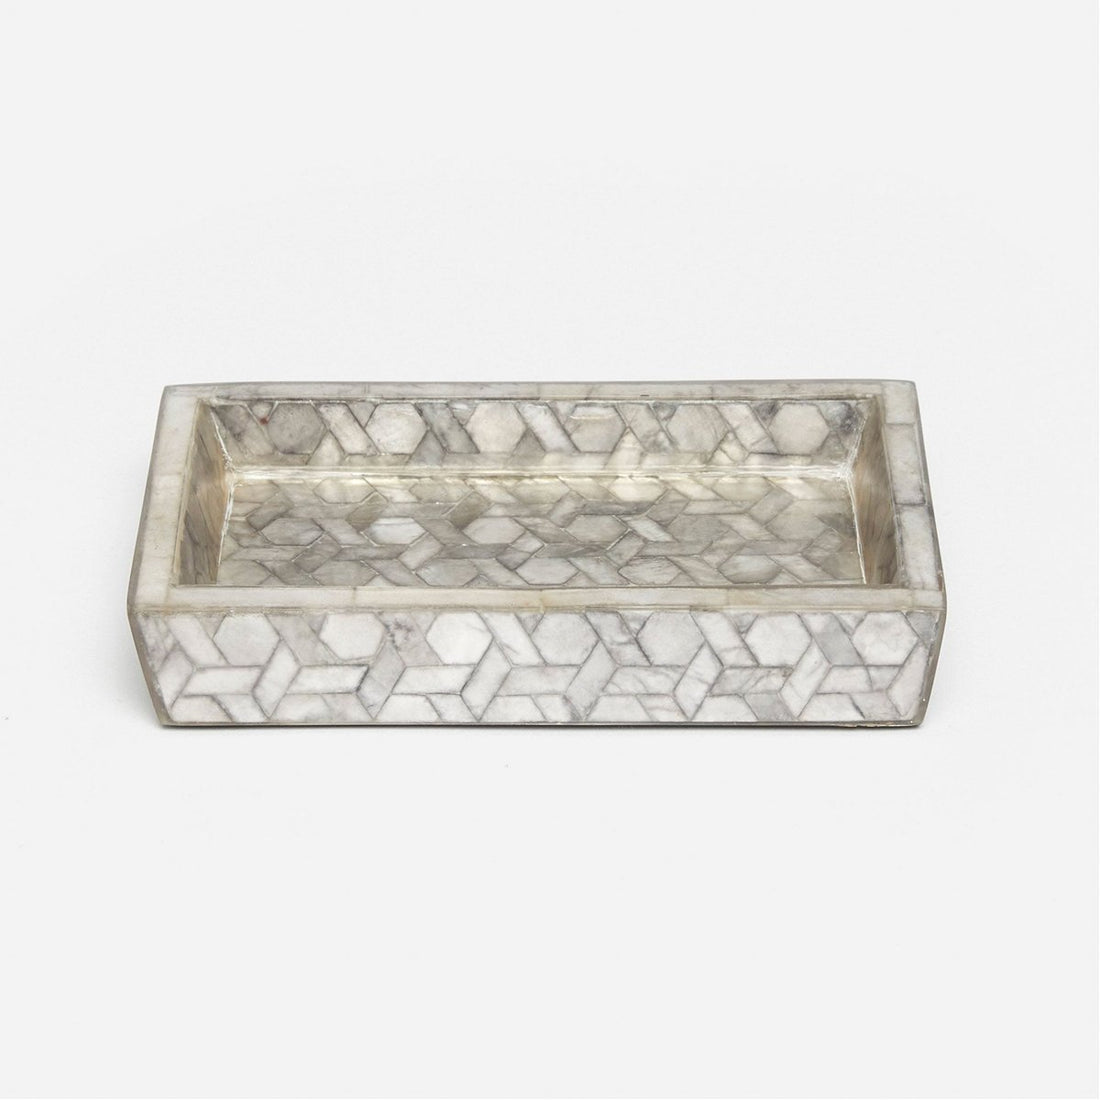 Pigeon and Poodle Melfi Rectangular Soap Dish, Tapered